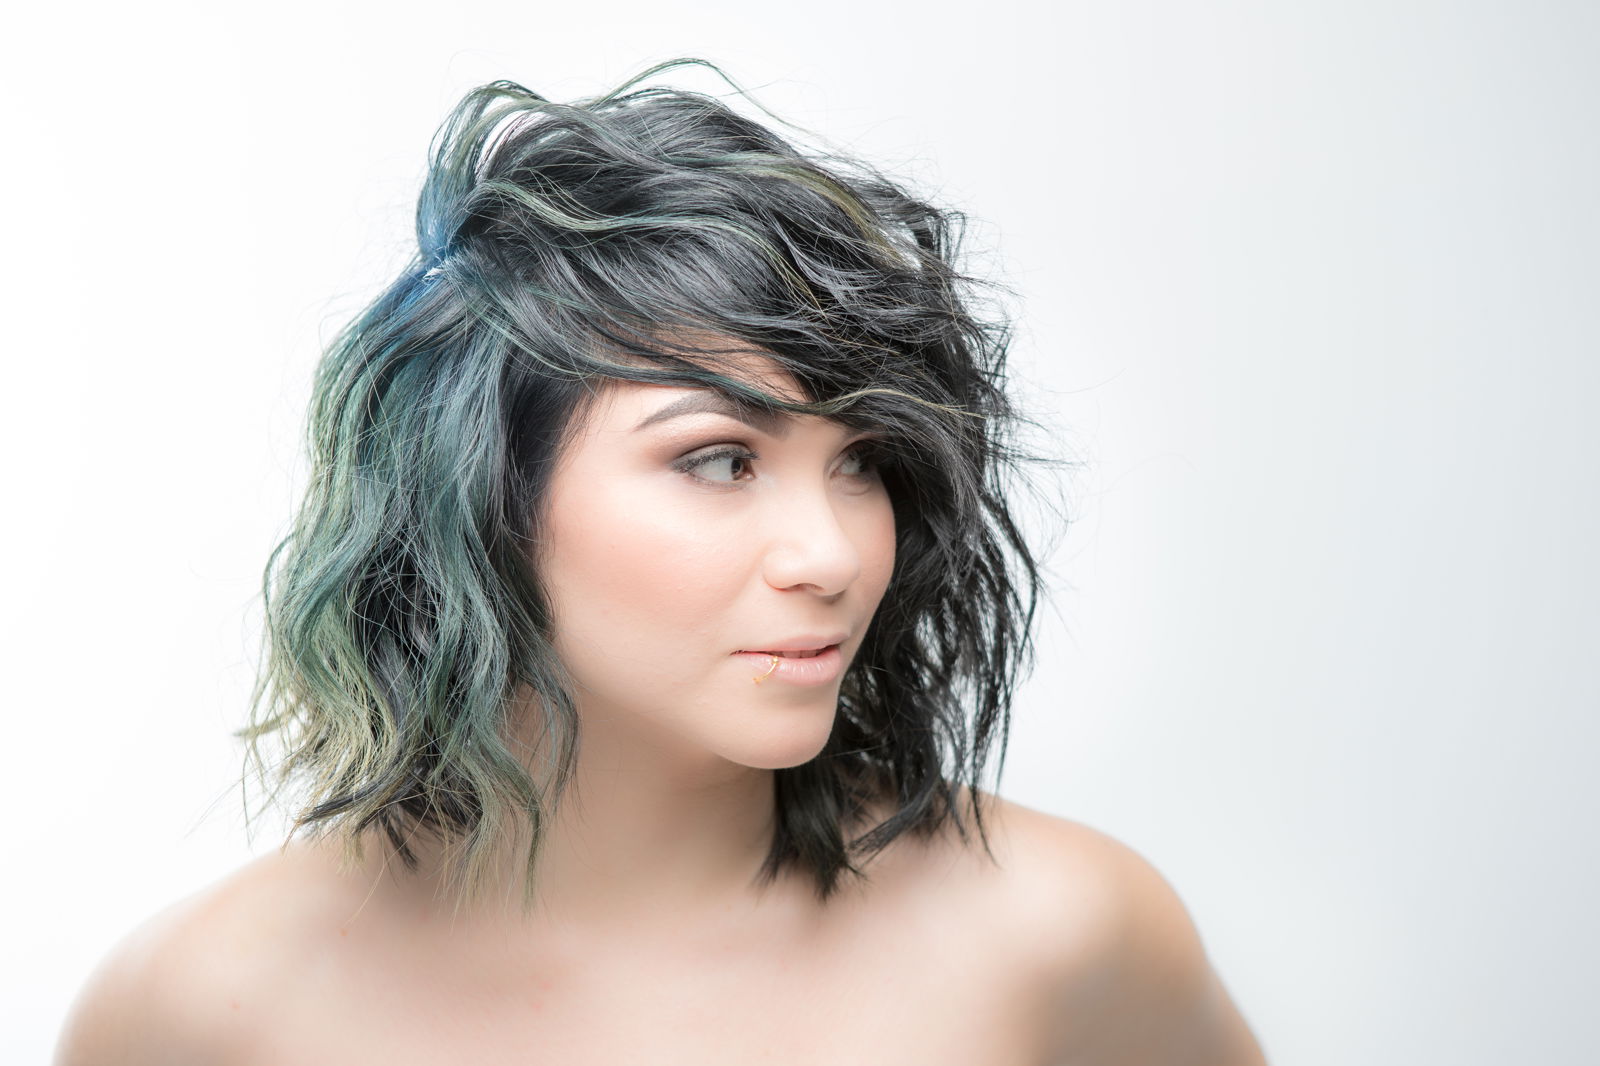 Shoulder-length tousled bob with a wash of green through it.